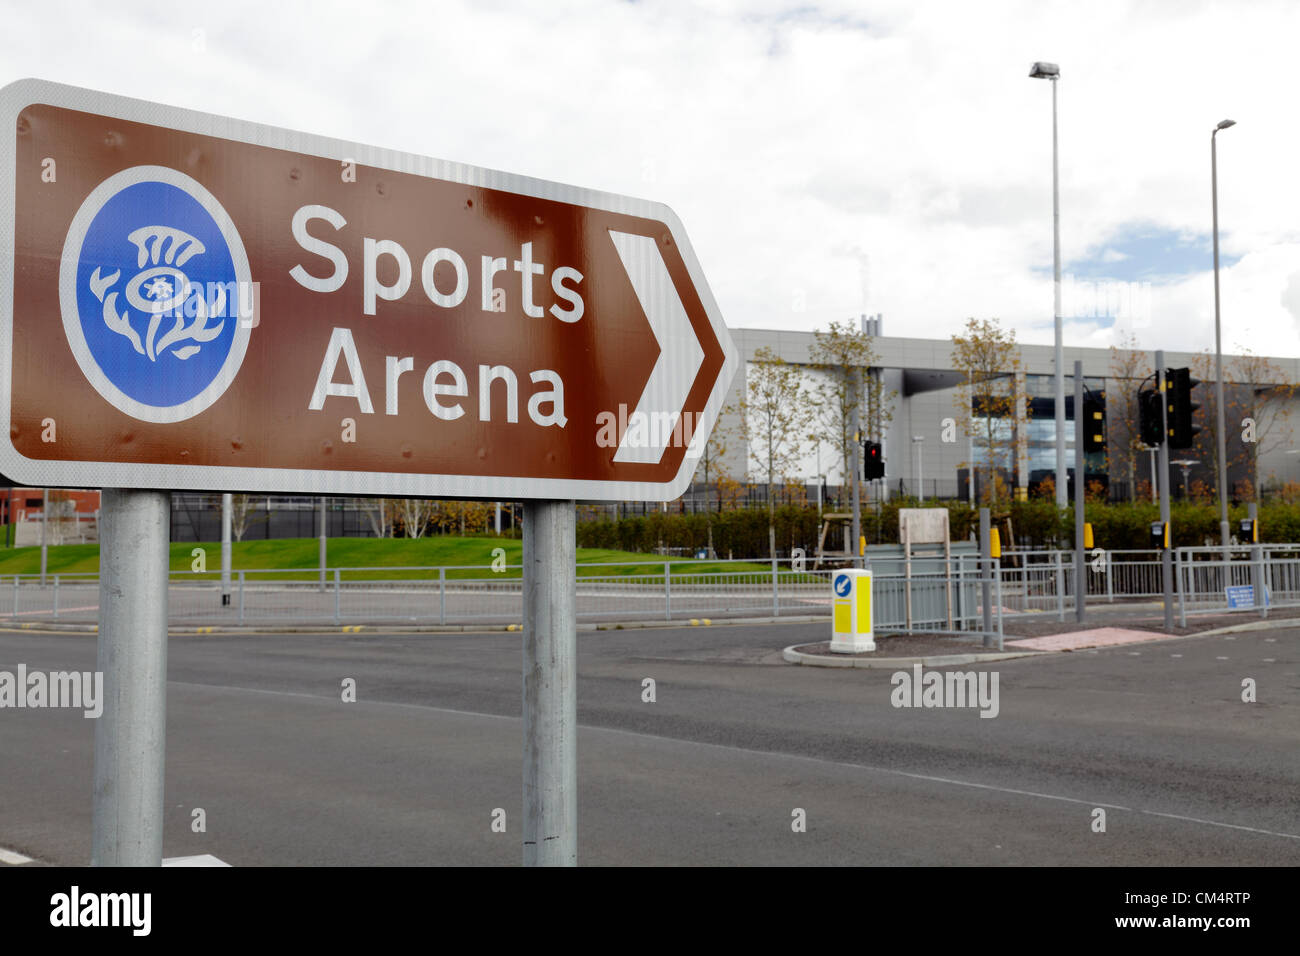 A Sports Arena direction sign, Scotland, UK Stock Photo